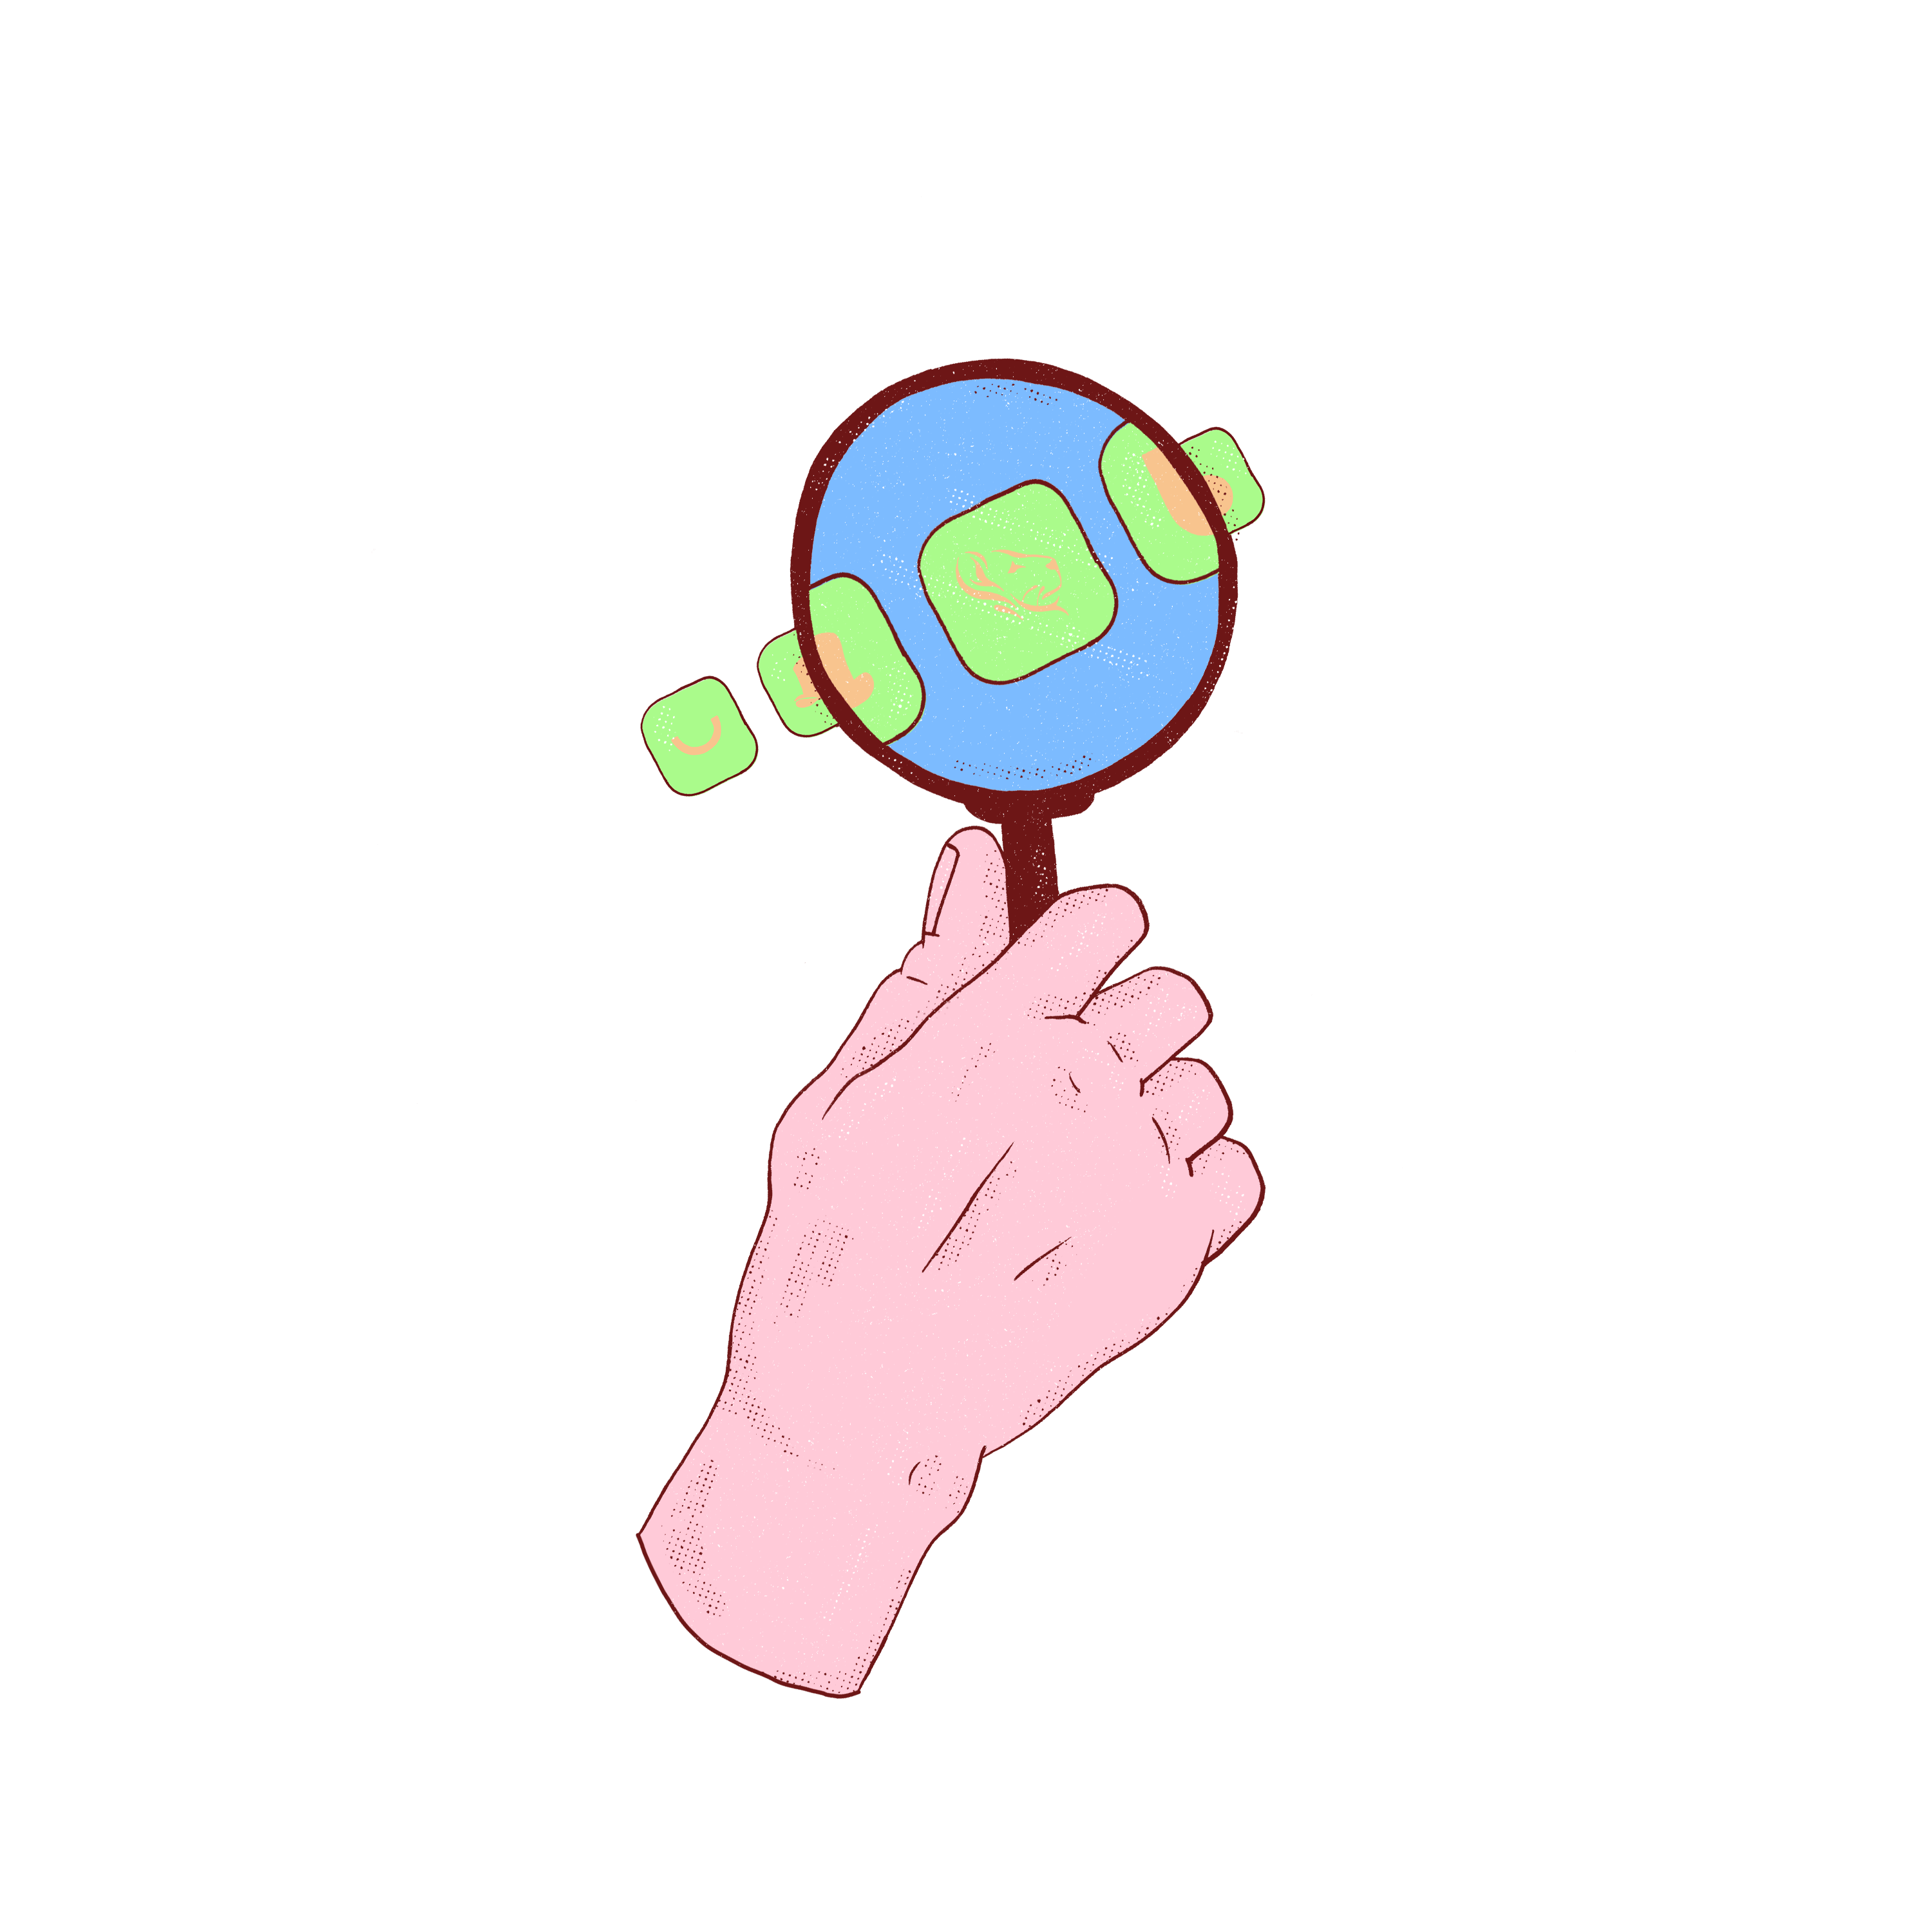 Illustration of a hand holding a magnifying glass with with reviews stars behind the magnifying glass.